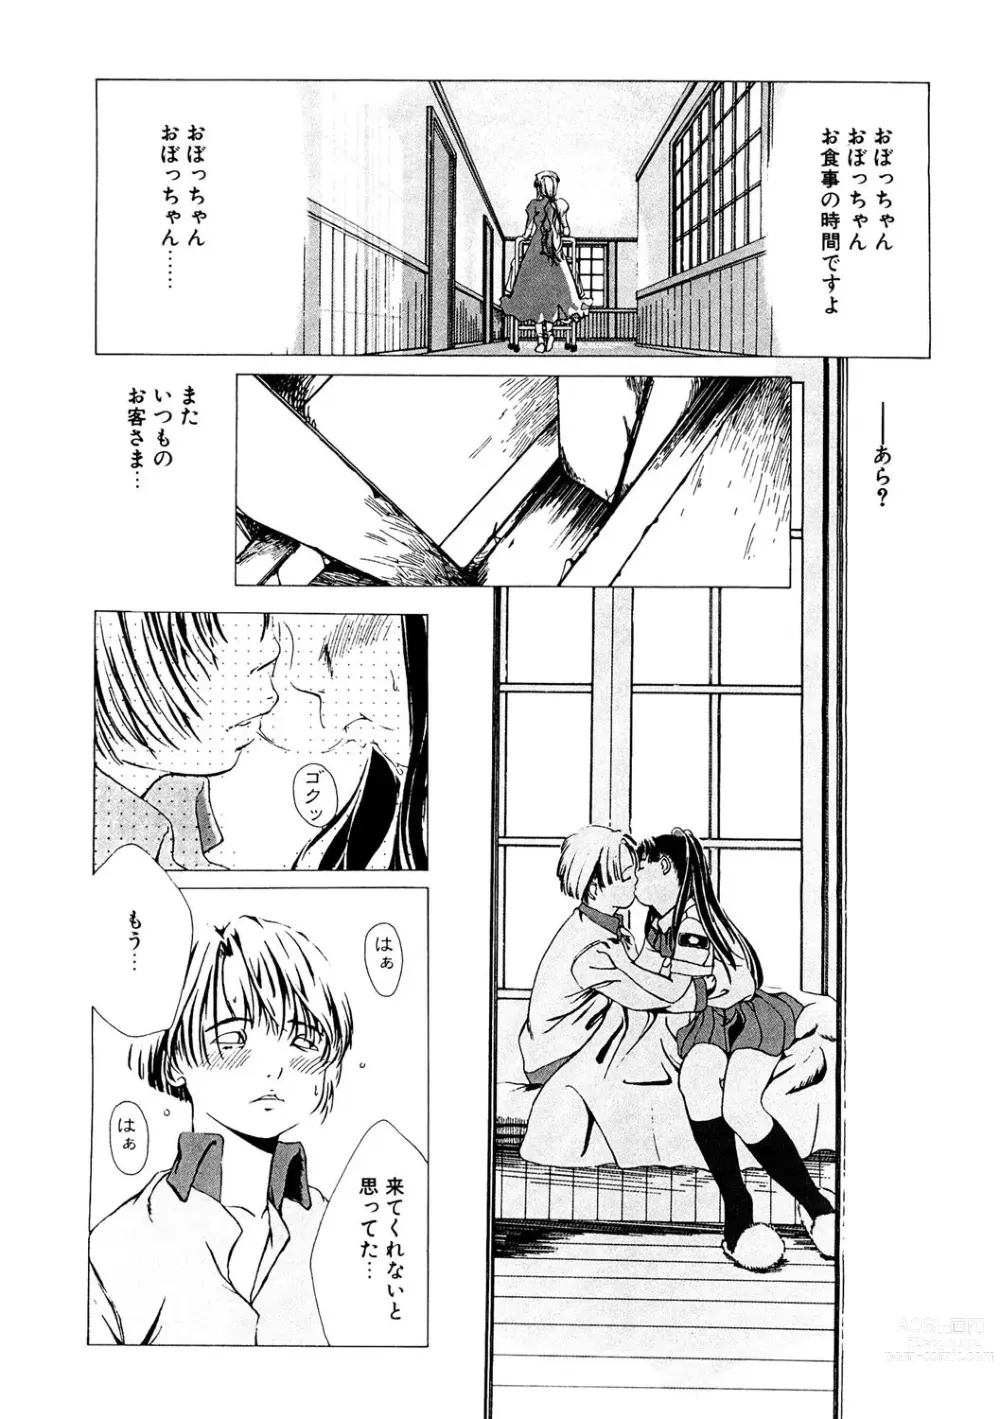 Page 161 of manga LQ -Little Queen- Vol. 53